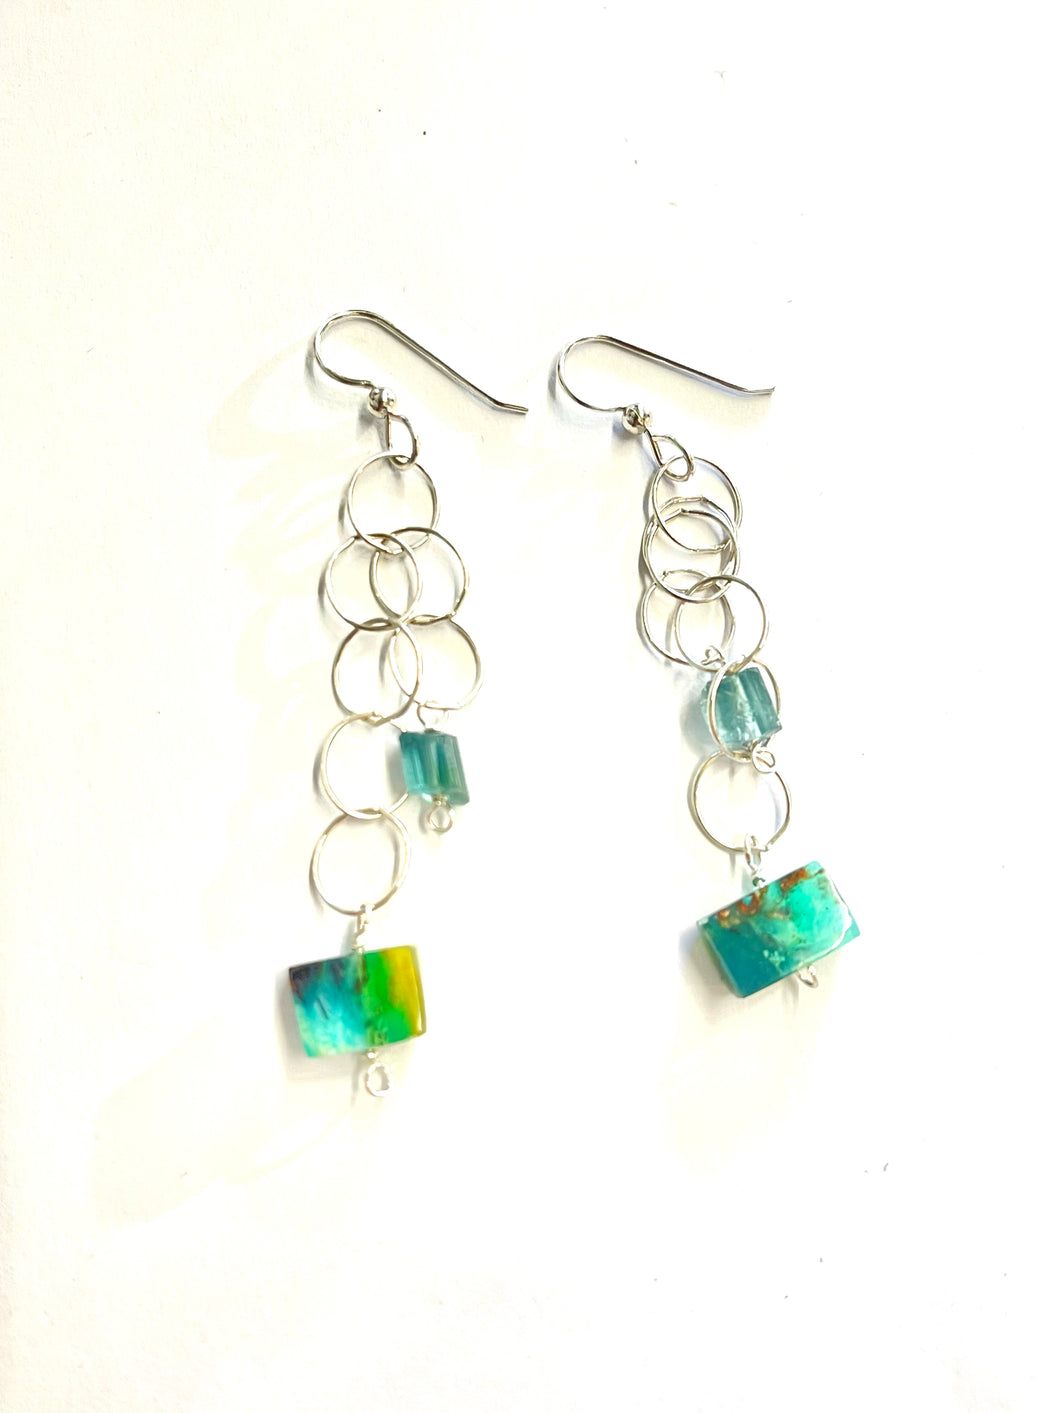 Earrings with chain and unique cut opalized wood and indigo tourmaline